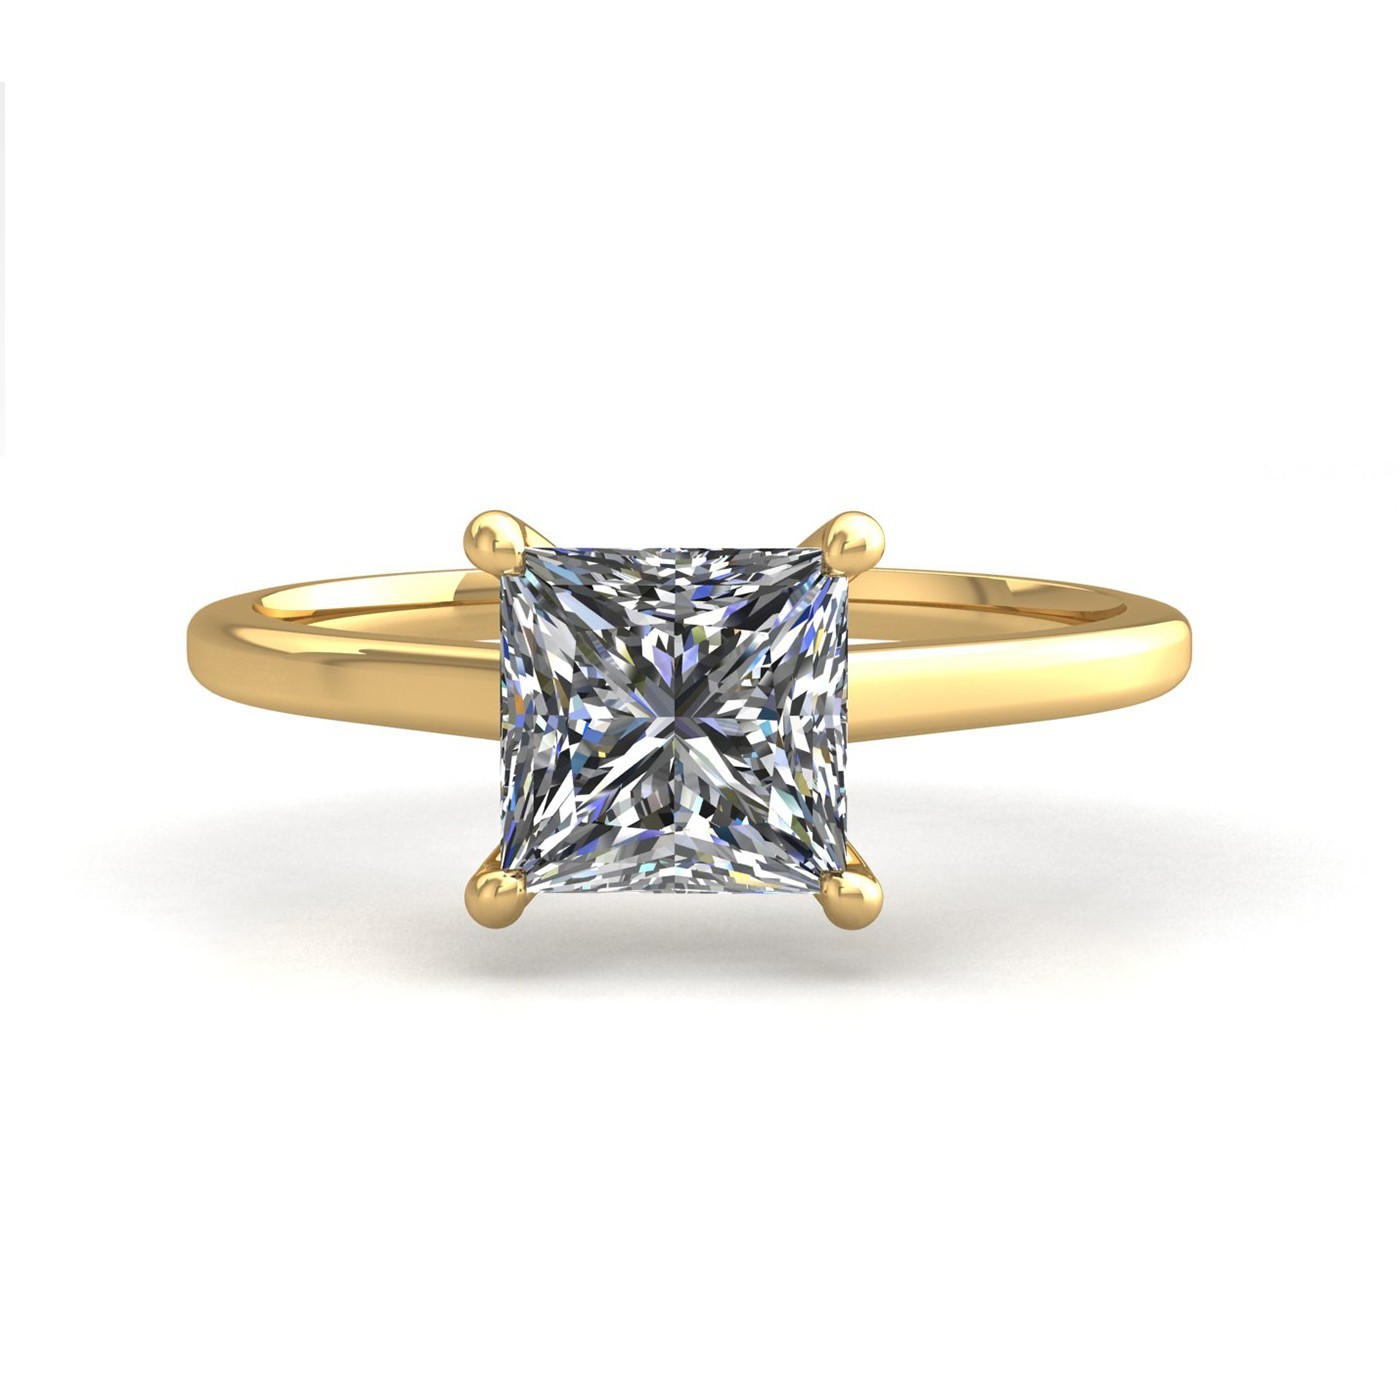 18k yellow gold  2,00 ct 4 prongs solitaire princess cut diamond engagement ring with whisper thin band Photos & images